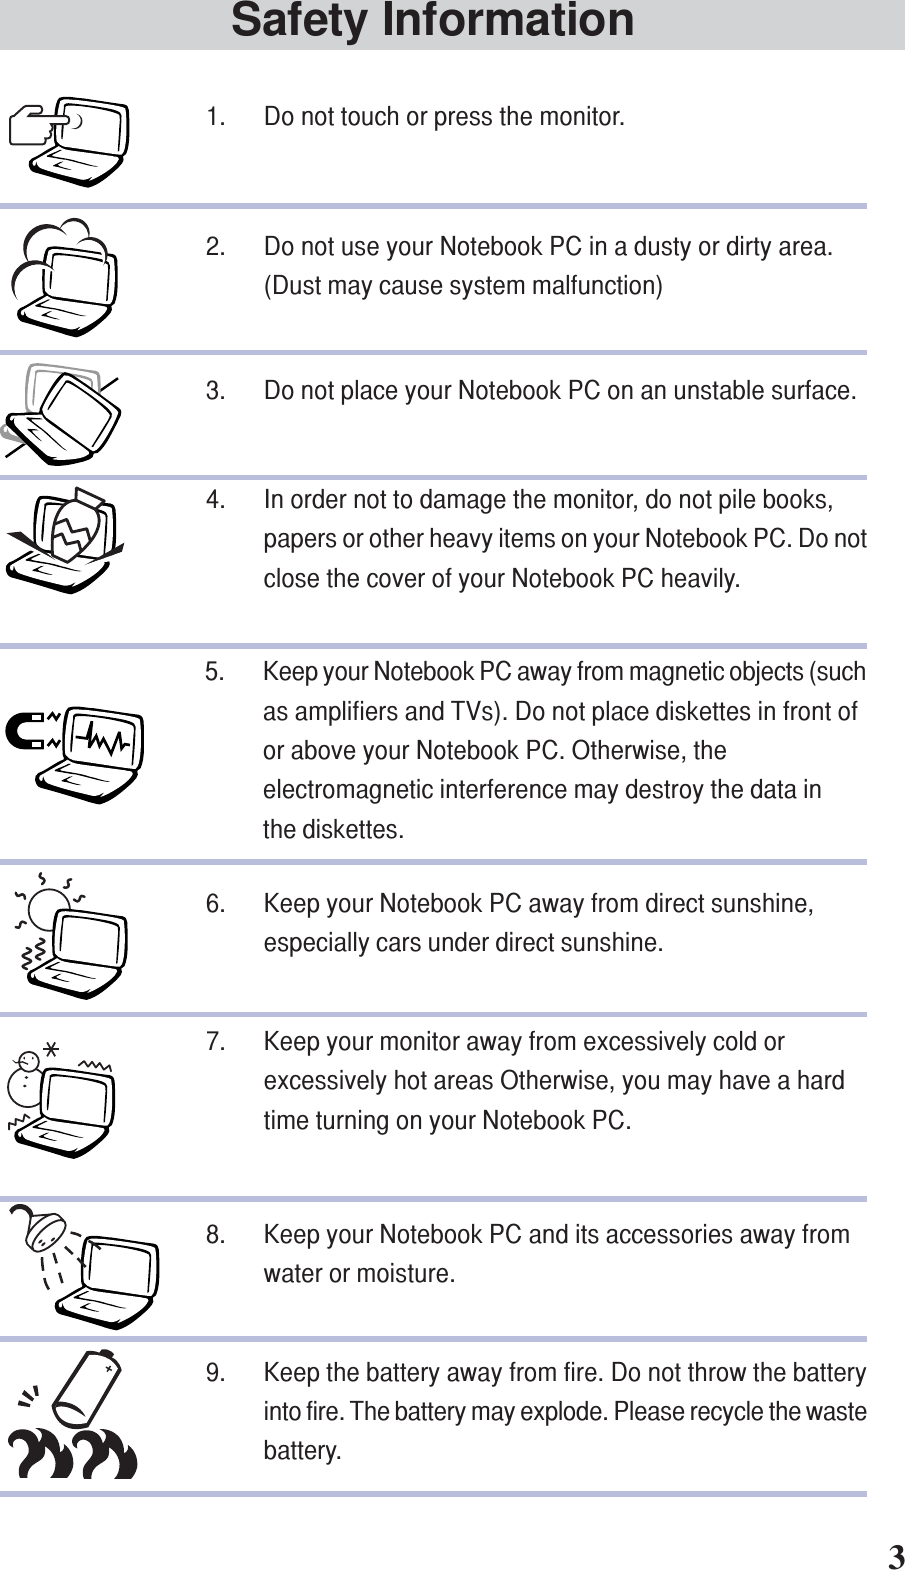 Safety Information1. Do not touch or press the monitor.2. Do not use your Notebook PC in a dusty or dirty area.(Dust may cause system malfunction)3. Do not place your Notebook PC on an unstable surface.4. In order not to damage the monitor, do not pile books,papers or other heavy items on your Notebook PC. Do notclose the cover of your Notebook PC heavily.5. Keep your Notebook PC away from magnetic objects (suchas amplifiers and TVs). Do not place diskettes in front ofor above your Notebook PC. Otherwise, theelectromagnetic interference may destroy the data inthe diskettes.6. Keep your Notebook PC away from direct sunshine,especially cars under direct sunshine.7. Keep your monitor away from excessively cold orexcessively hot areas Otherwise, you may have a hardtime turning on your Notebook PC.8. Keep your Notebook PC and its accessories away fromwater or moisture.9. Keep the battery away from fire. Do not throw the batteryinto fire. The battery may explode. Please recycle the wastebattery.3